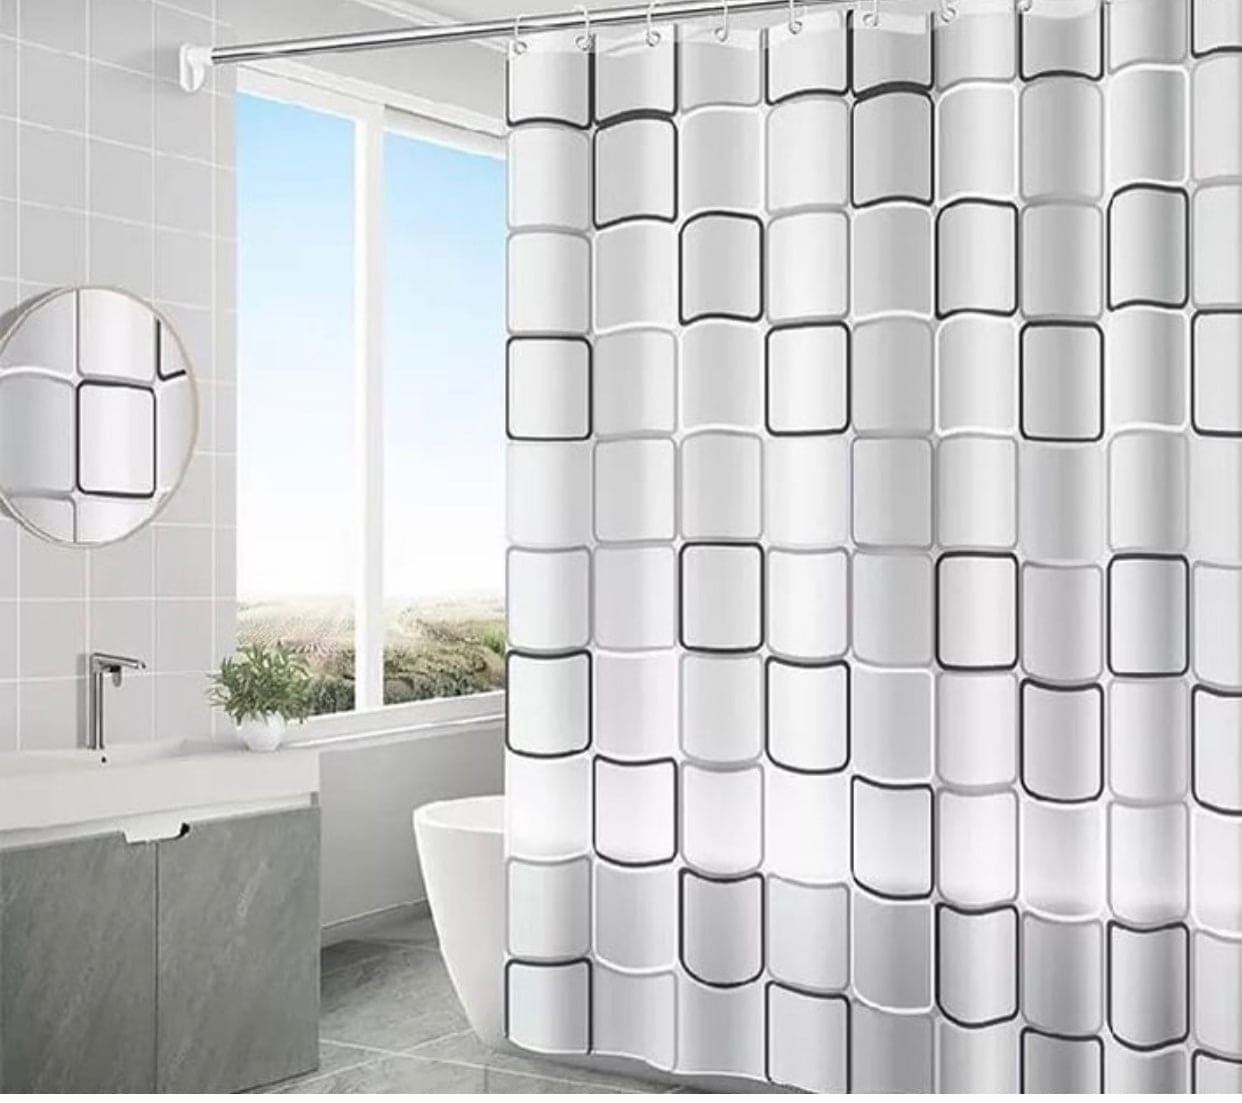 Amazing Water Proof Curtain Shower With Hooks, Printed Bathroom Shower Curtain, Parachutes Curtain For Bathroom